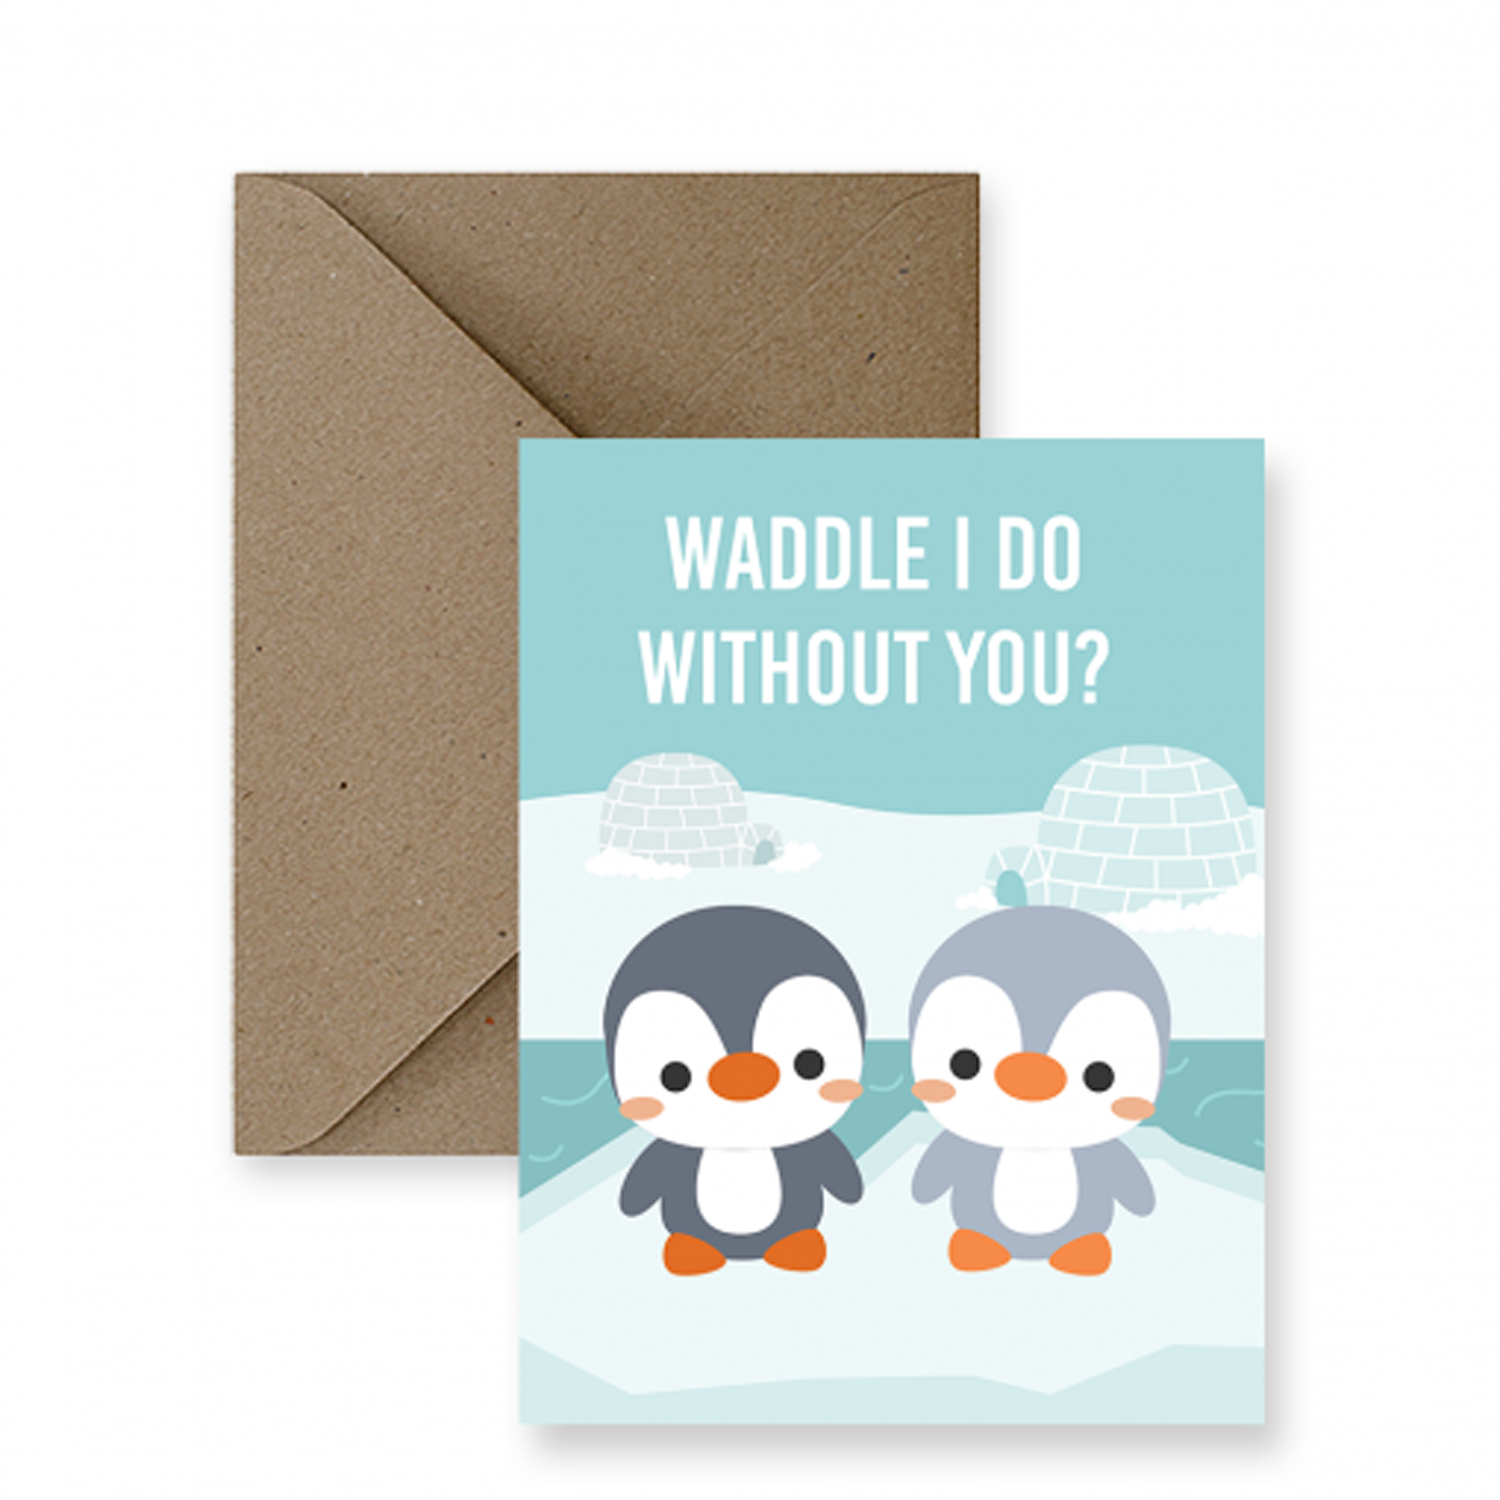 IMPAPER: Waddle I Do Without You Product Image 1 of 4